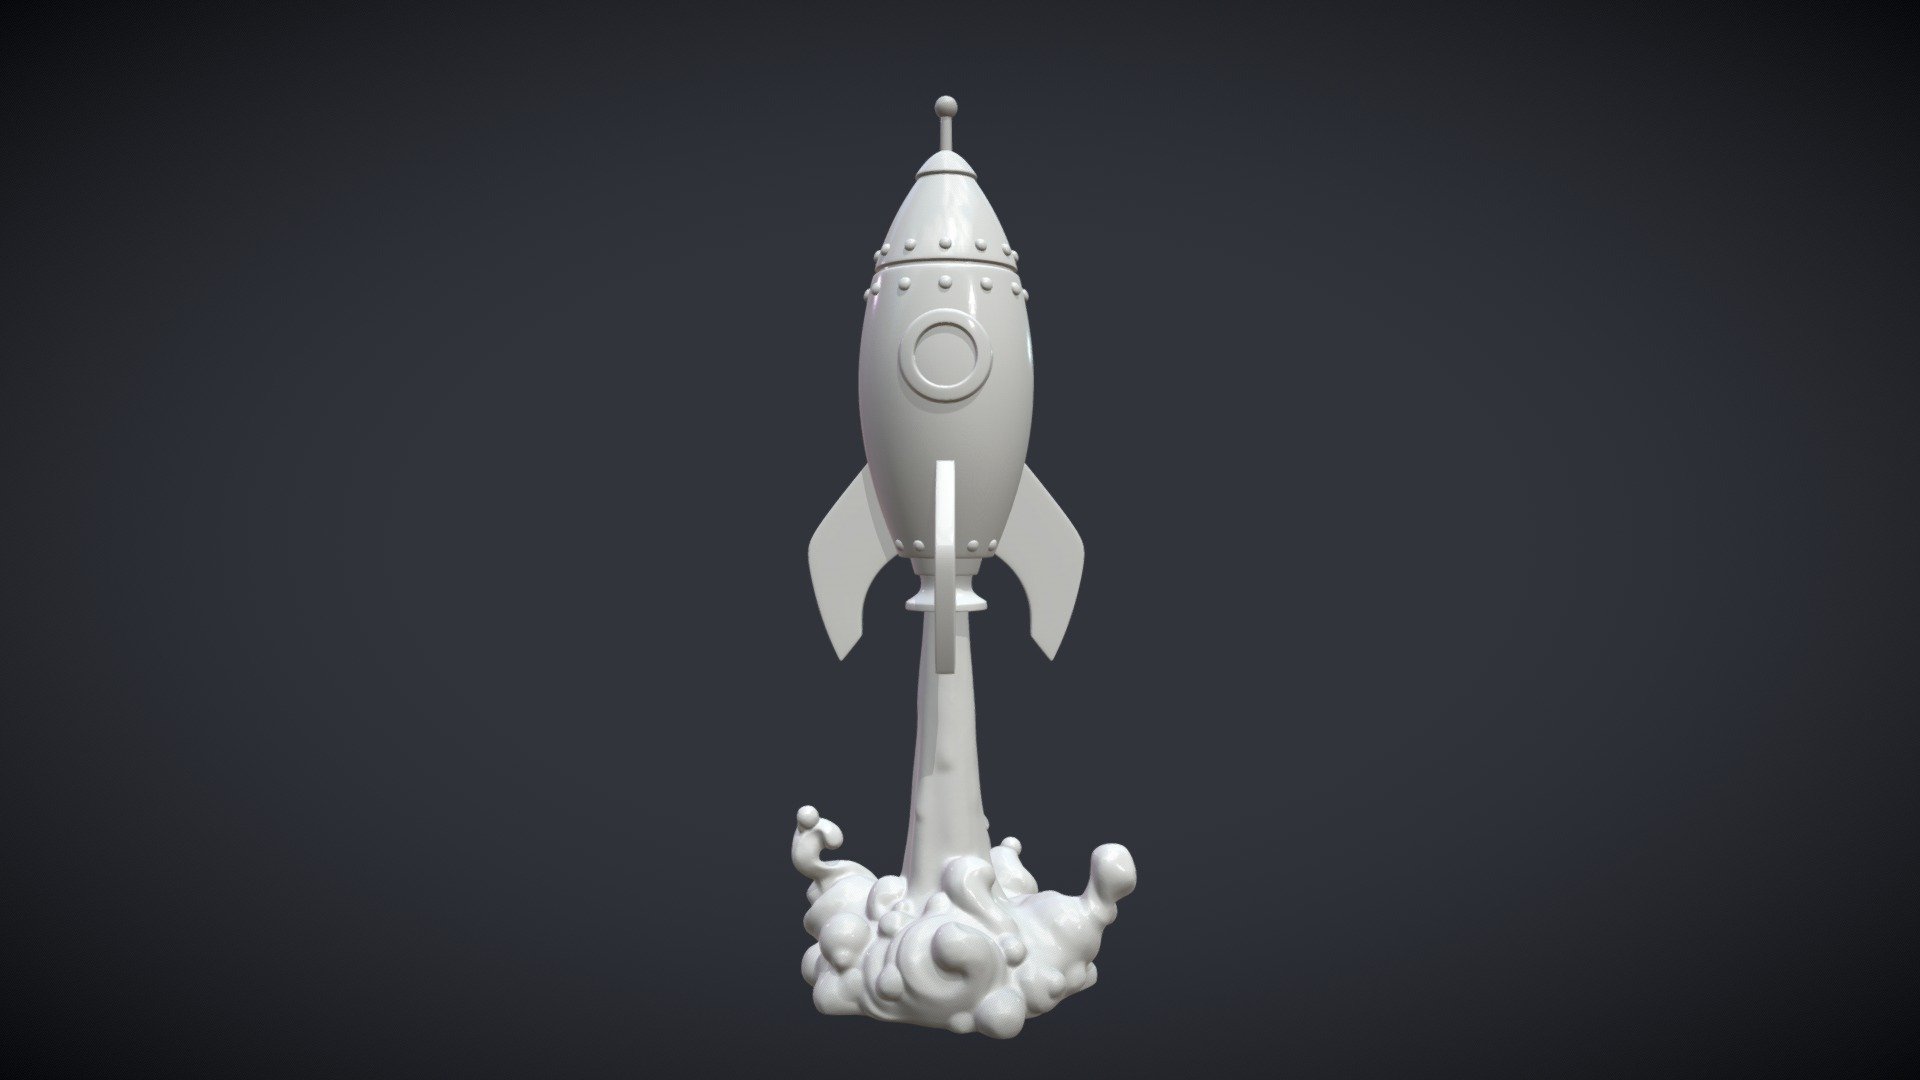 Print ready rocket

Measure units are millimeters, the rocket itself is about 5 cm in height (without smoke).

Mesh is manifold, no holes, no inverted faces, no bad contiguous edges.

Three versions of the model is available:

1) P_Rocket_Solid (.blend, .stl, .obj, .fbx) 378400 triangular faces. This files contains two objects the rocket itself and the smoke part. For stl here is one separate file for each part.

2) P_Rocket_Hollow (.blend, .stl, .obj, .fbx) 428796 triangular faces. Here is three hollow parts: the top part, the main part and the smoke. Wall thickness is about 1 mm. For stl here is one separate file for each part.

3) P_Rocket_Solid_onePiece (.blend, .stl, .obj, .fbx) 371462 triangular faces. Here is one solid object 3d model